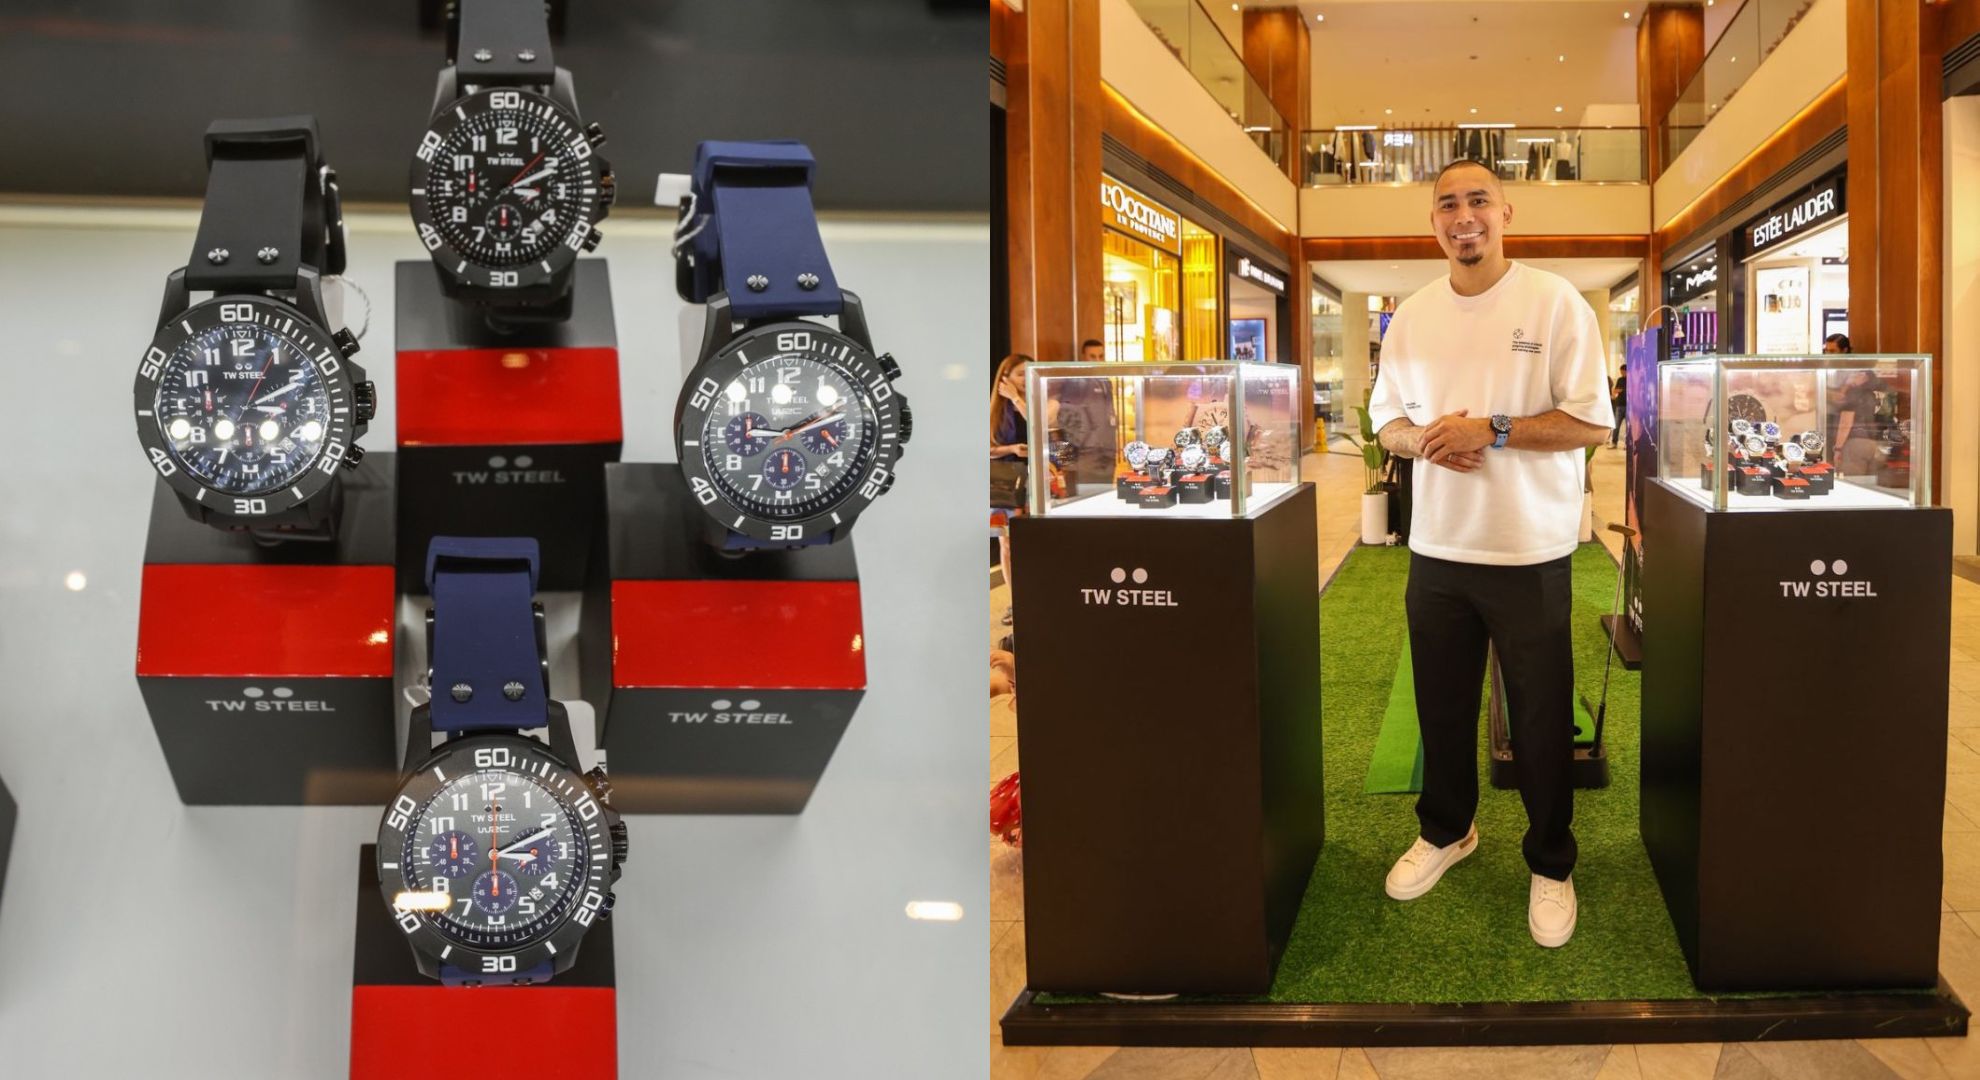 Tee off at TW Steel’s exclusive pop-up shop at Rockwell Power Plant Mall